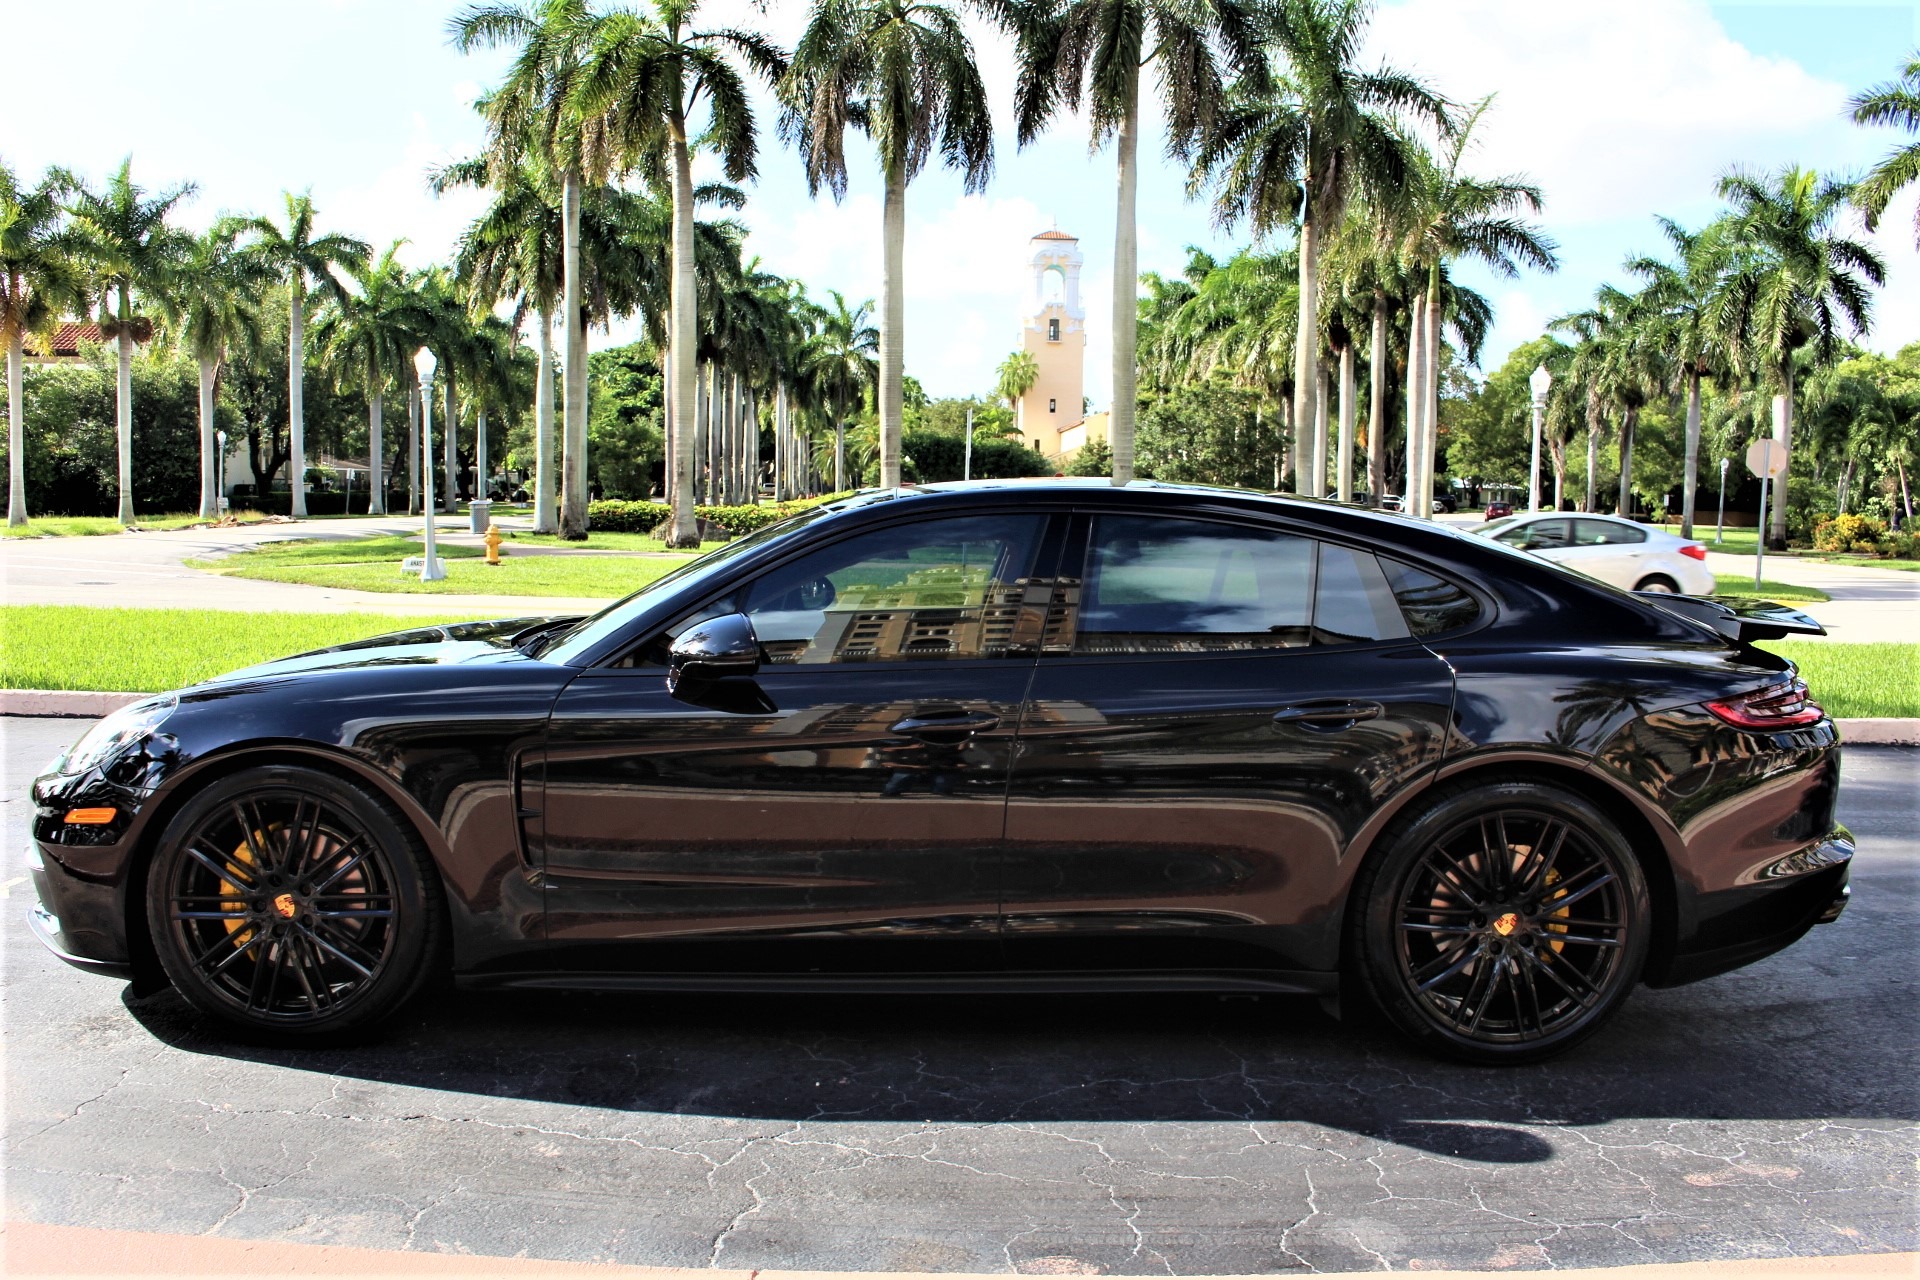 Used 2017 Porsche Panamera for sale Sold at The Gables Sports Cars in Miami FL 33146 2